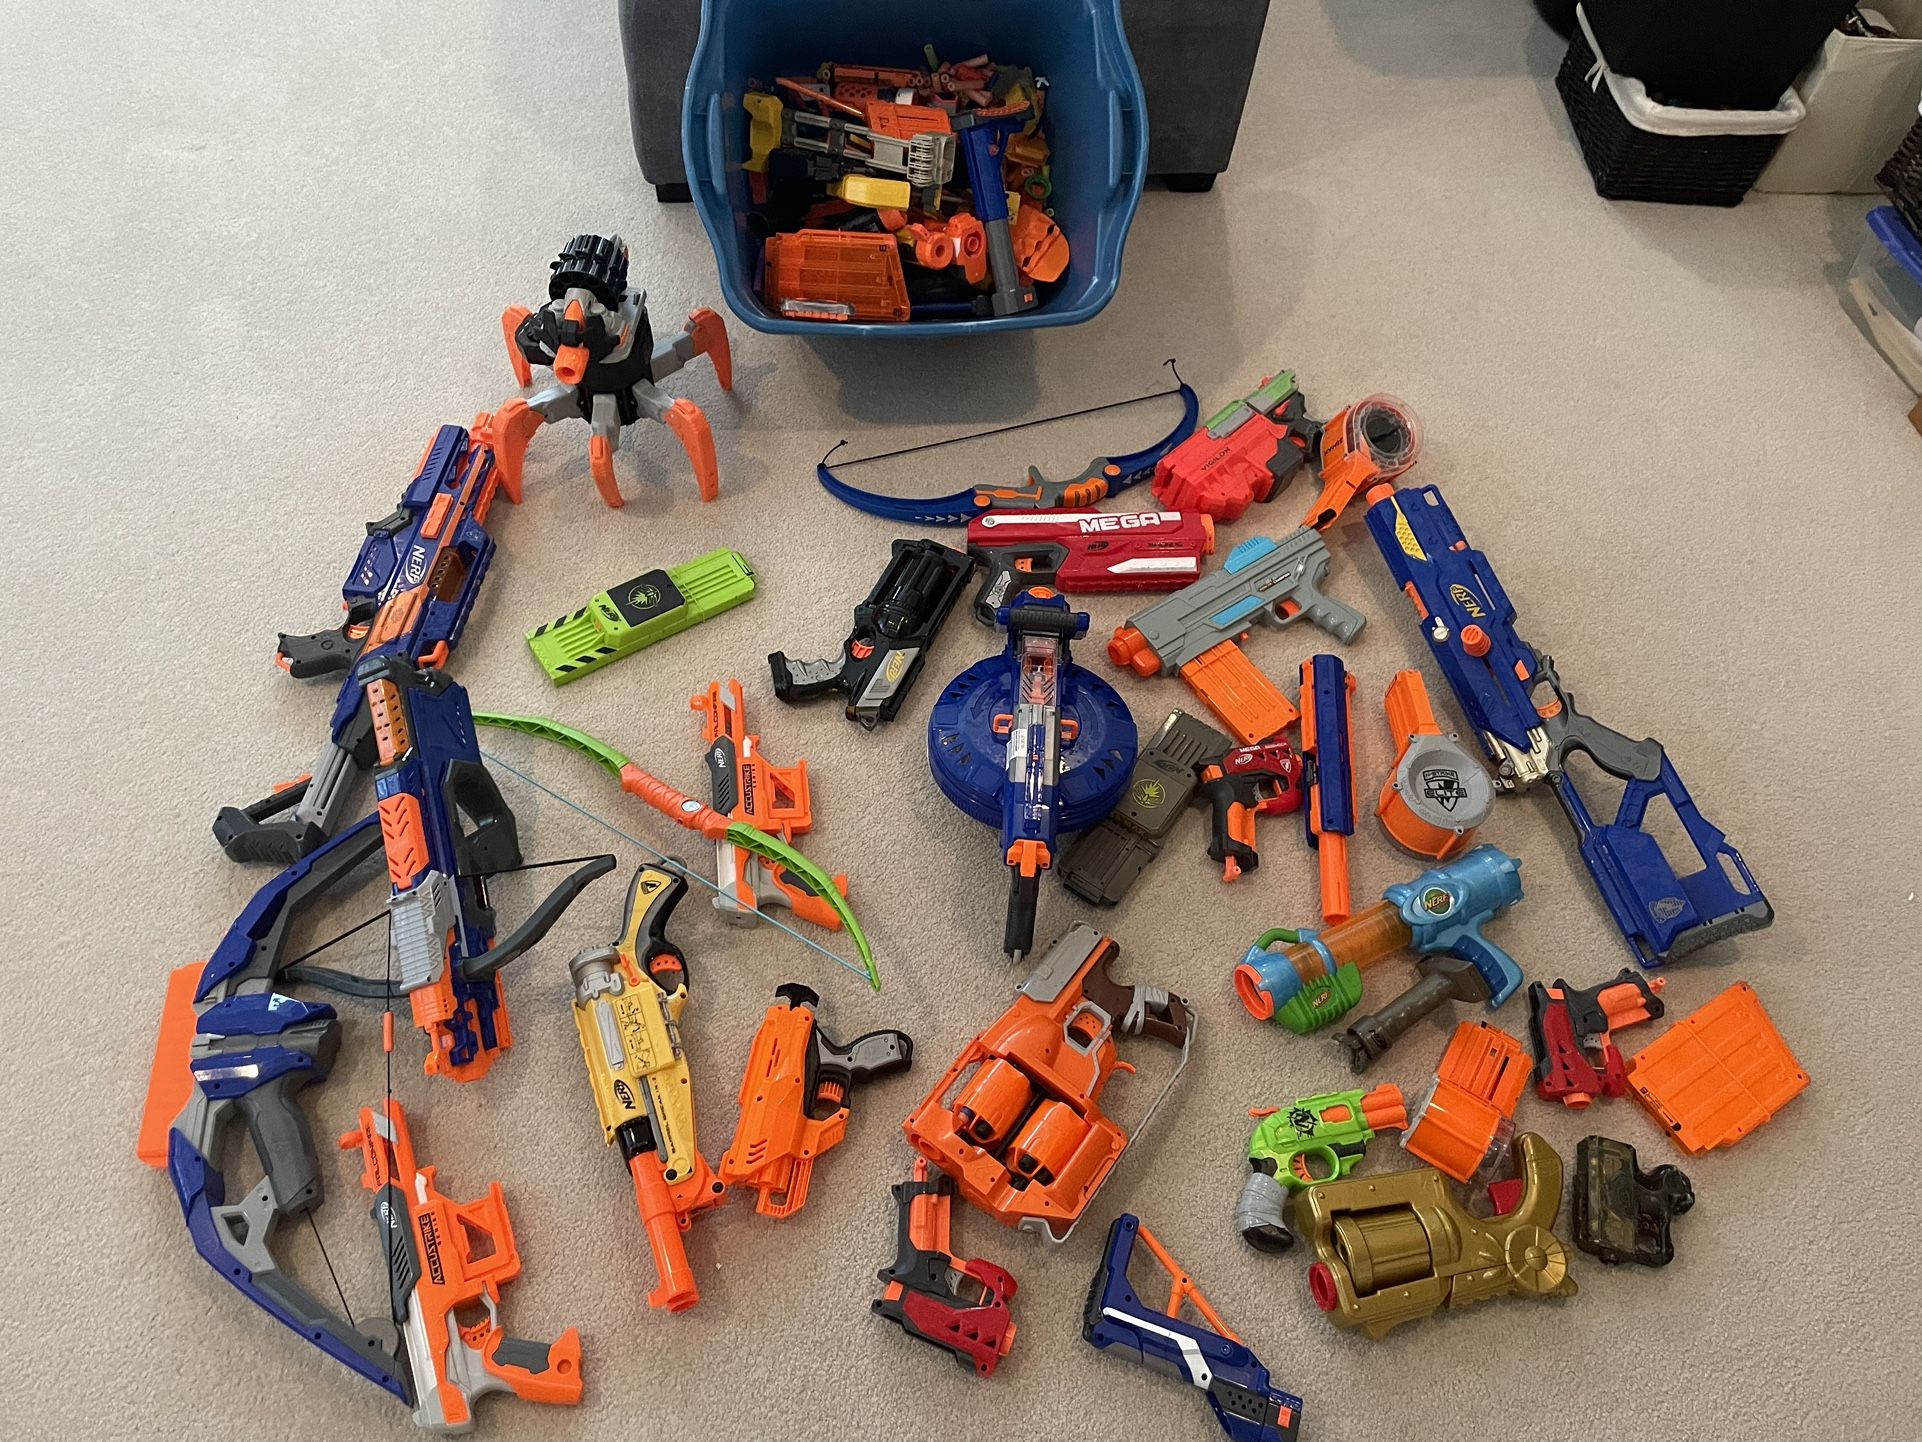 Used Nerf Gun Lot - 20 Plus And Accessories